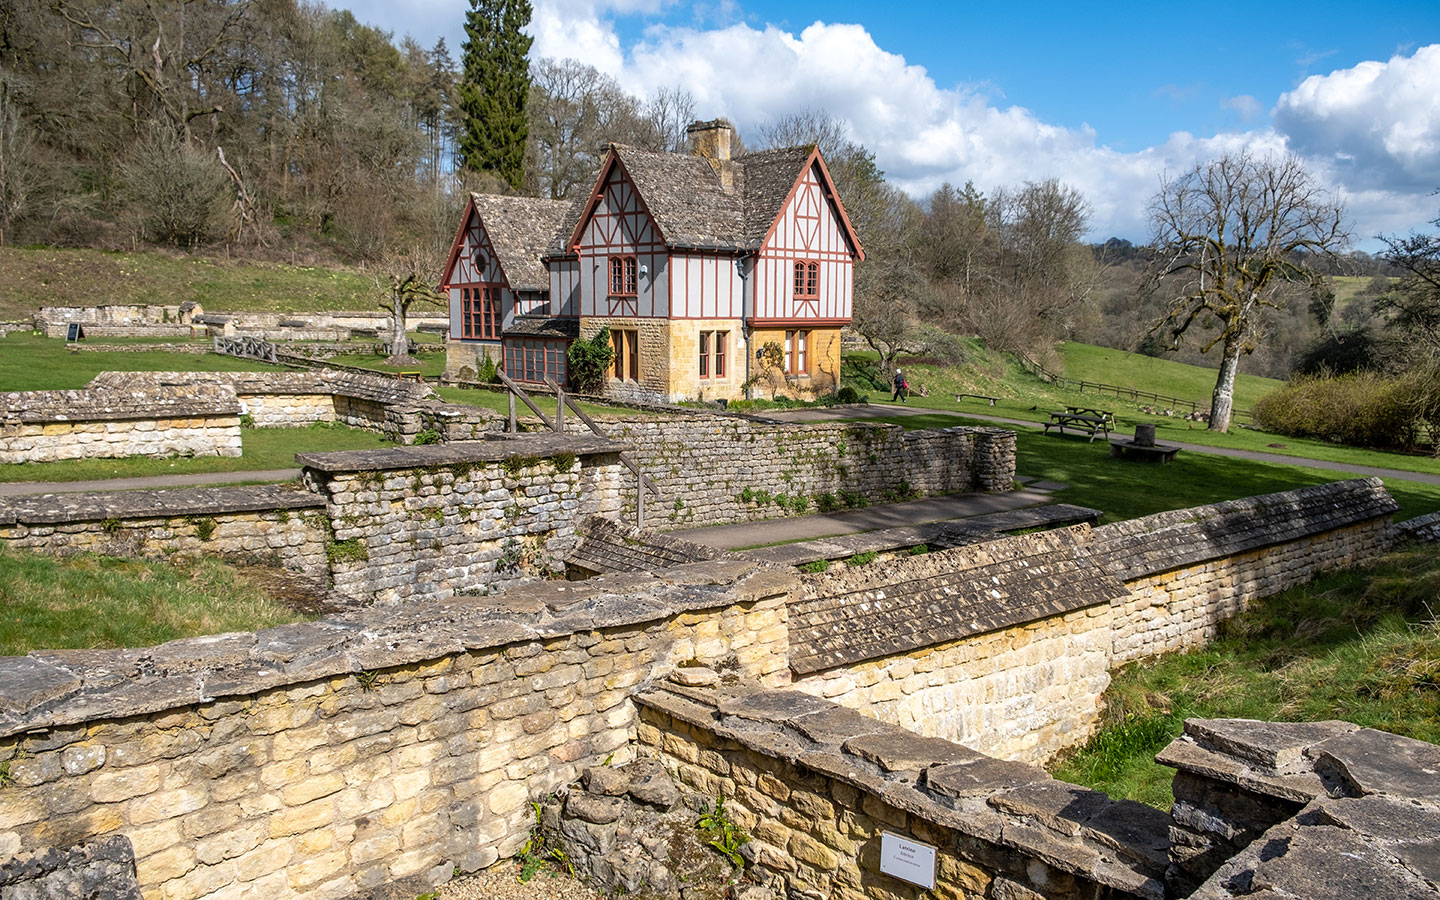 Chedworth Roman Villa in the Cotswolds